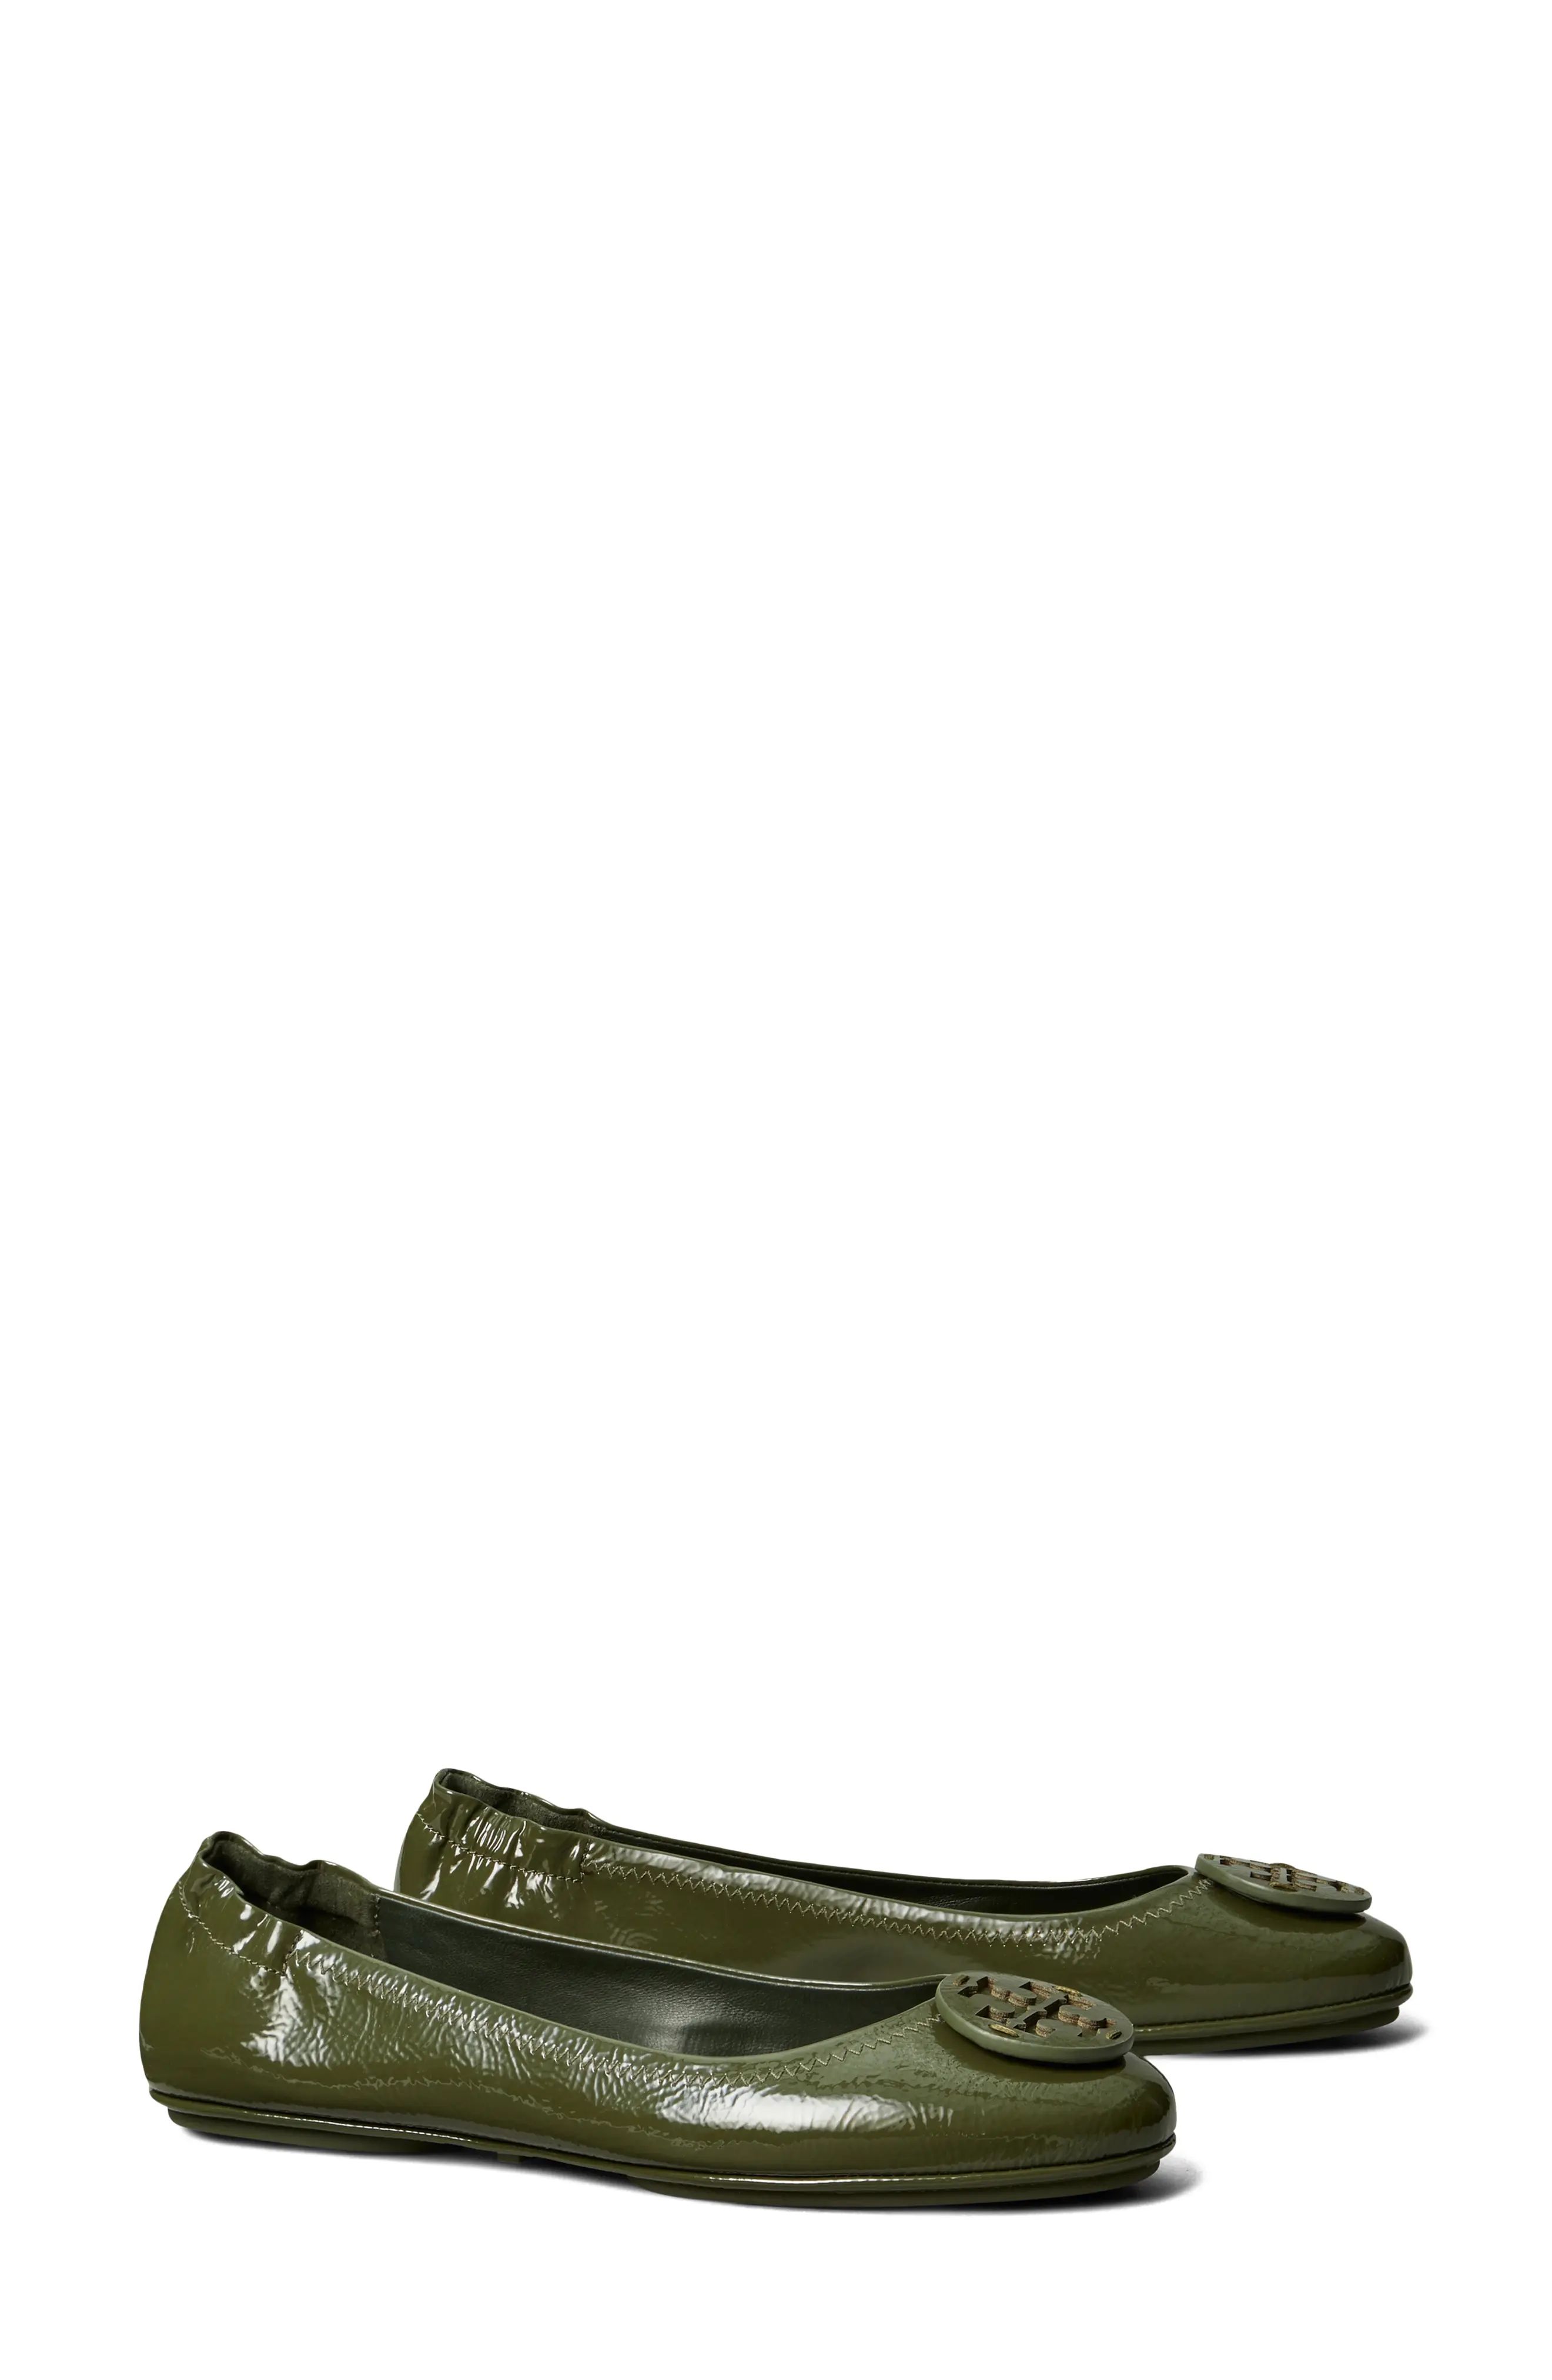 Tory Burch Minnie Travel Ballet Flat, Size 7 in Militare Green at Nordstrom | Nordstrom